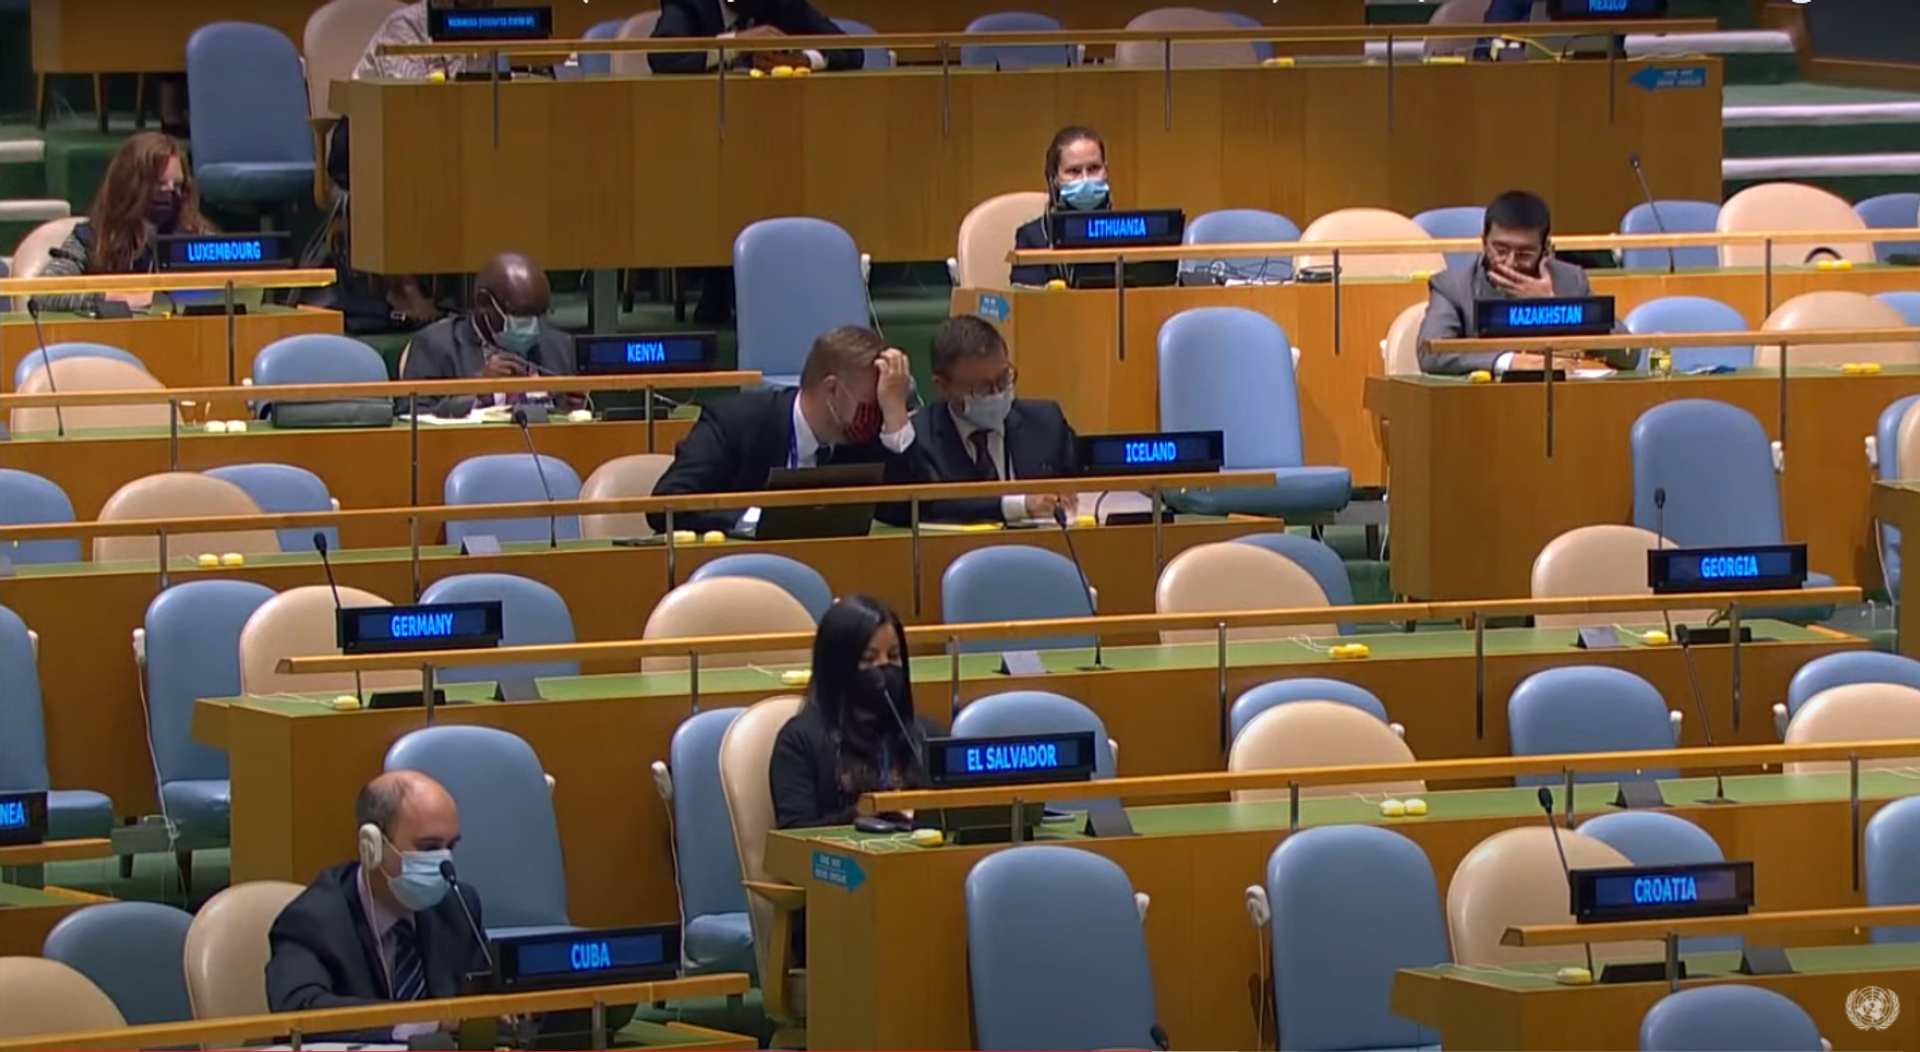 Screengrab of moment from Prime Minister Bennett's UN speech, showing a mostly empty auditorium at the UN building in New York. - Sputnik International, 1920, 27.09.2021